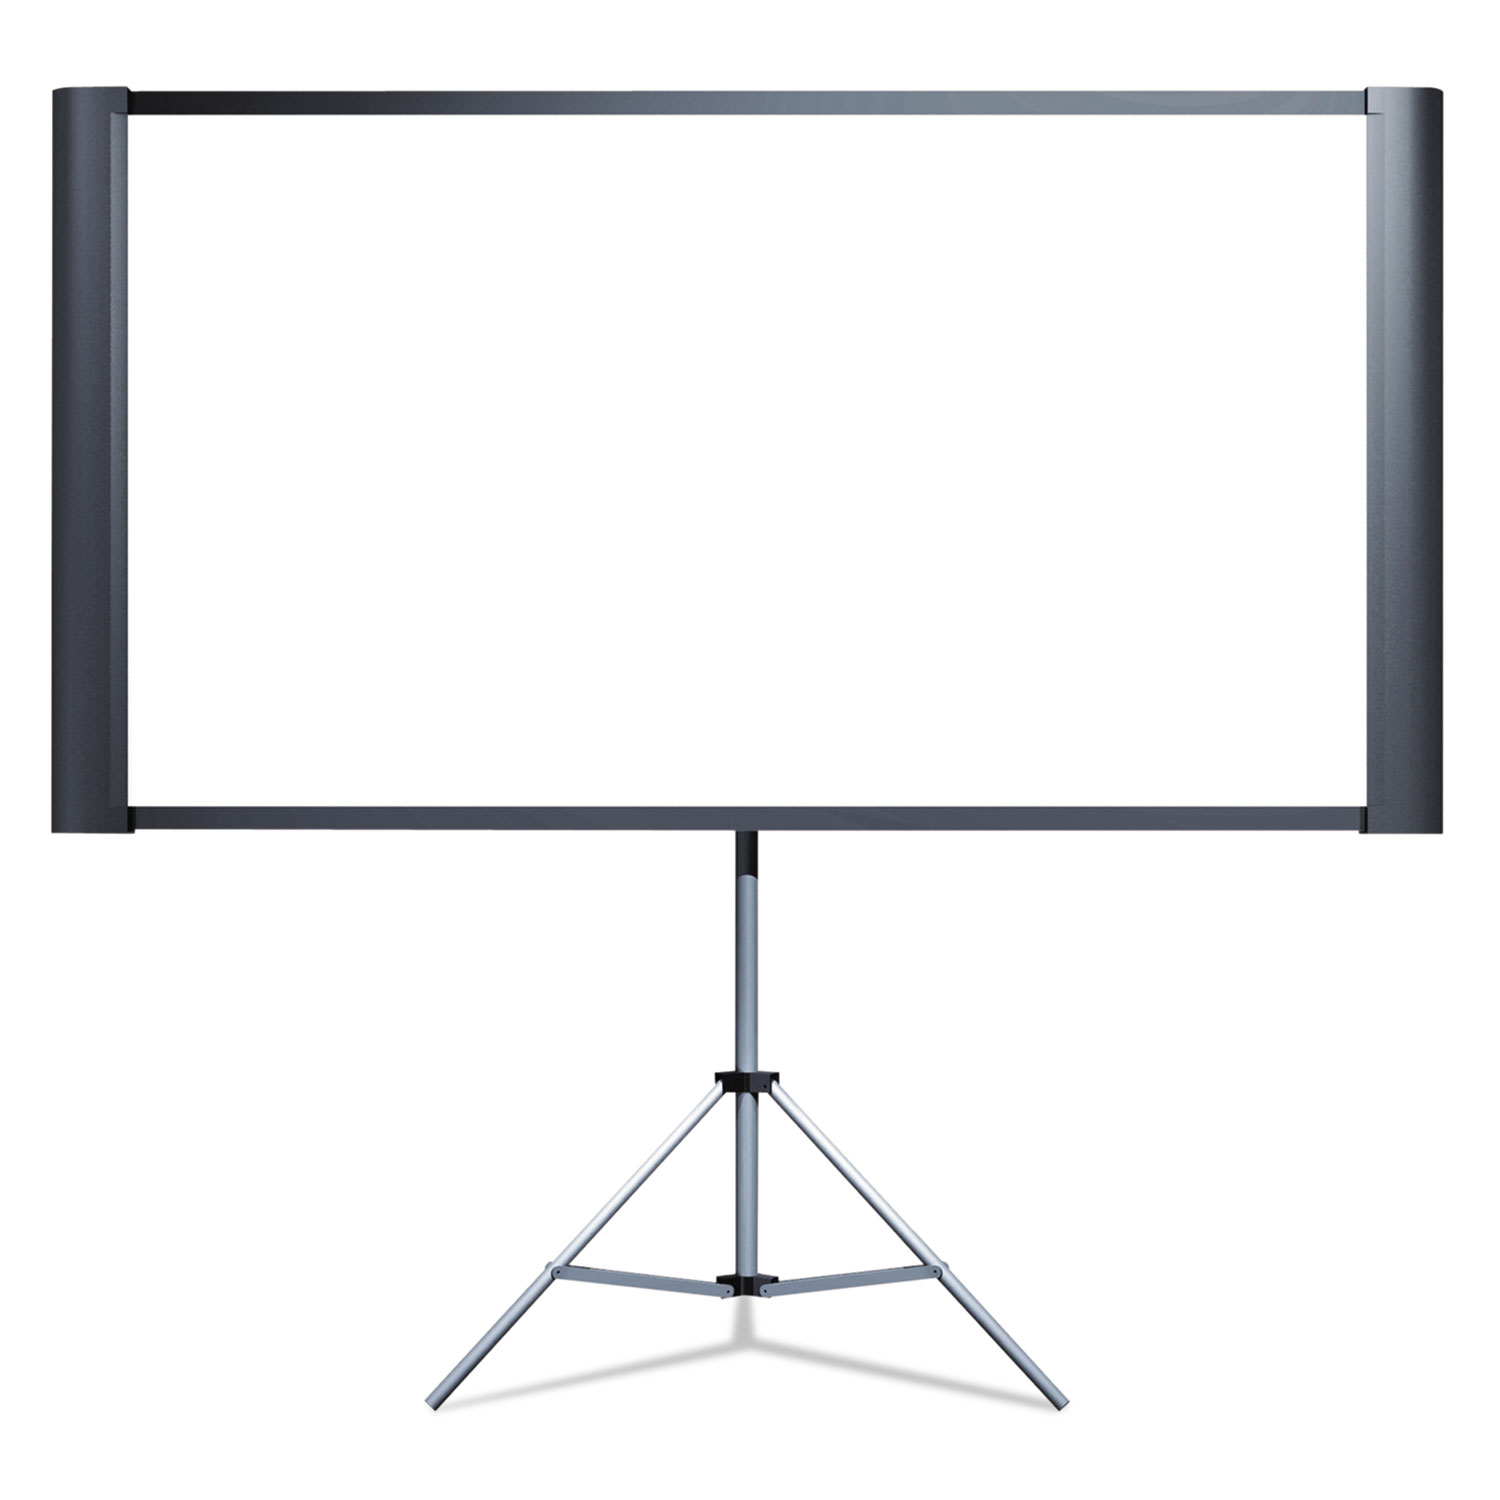  Epson ELPSC80 Duet Ultra Portable Projection Screen, 80 Widescreen (EPSELPSC80) 